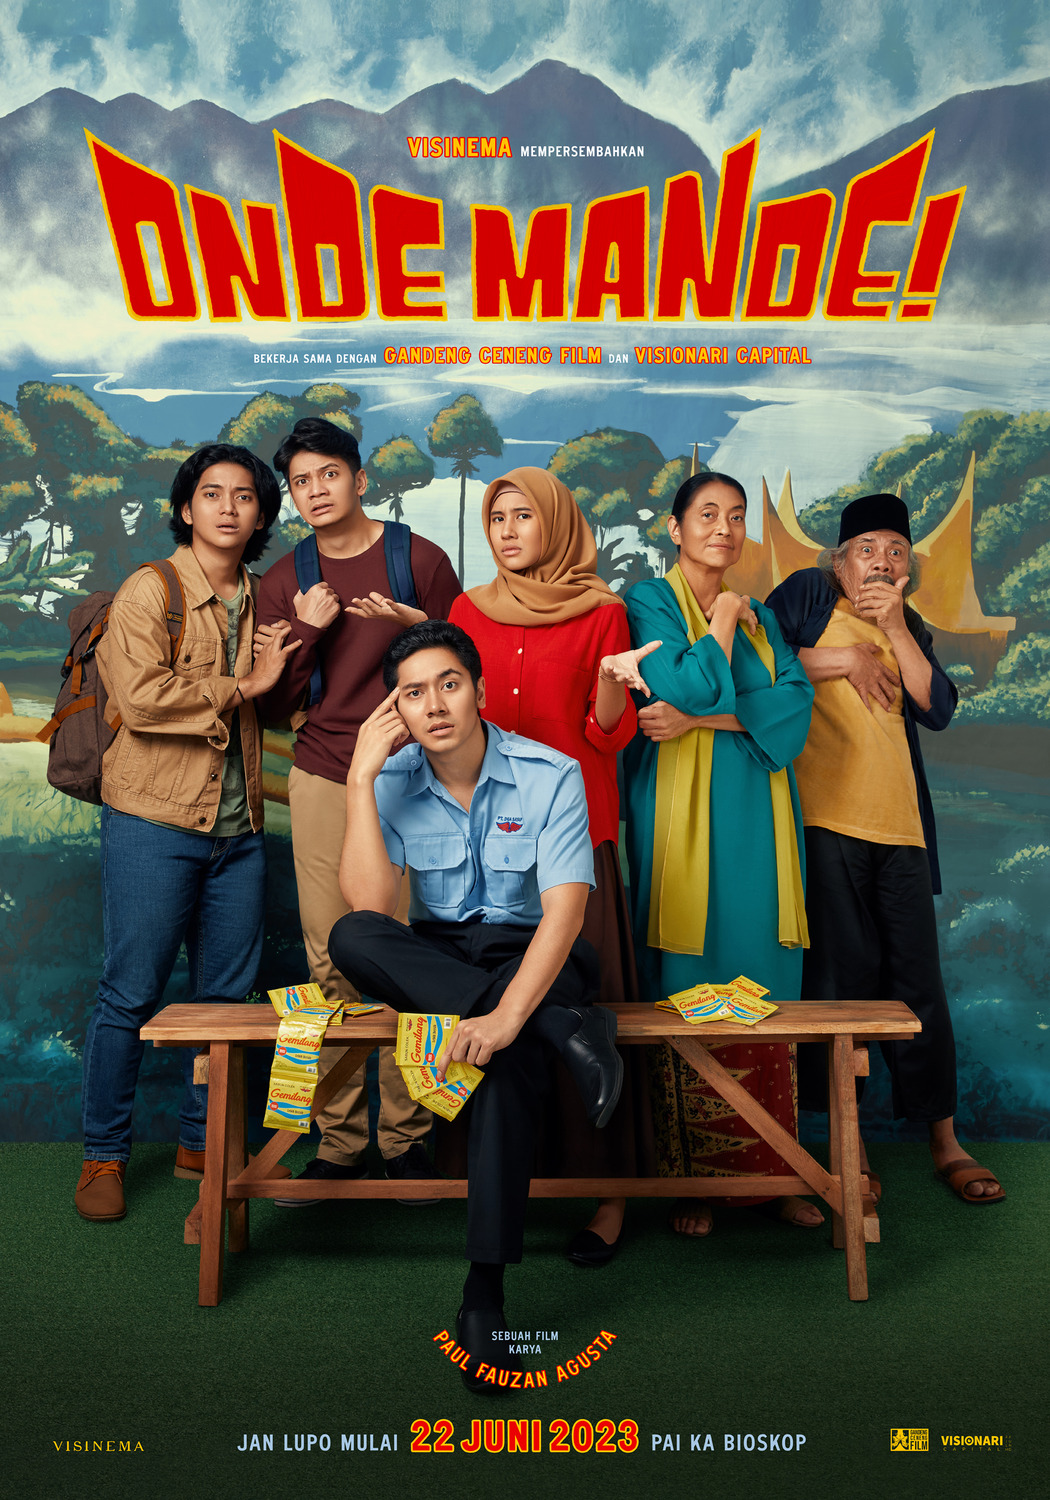 Extra Large Movie Poster Image for Onde Mande! (#1 of 8)